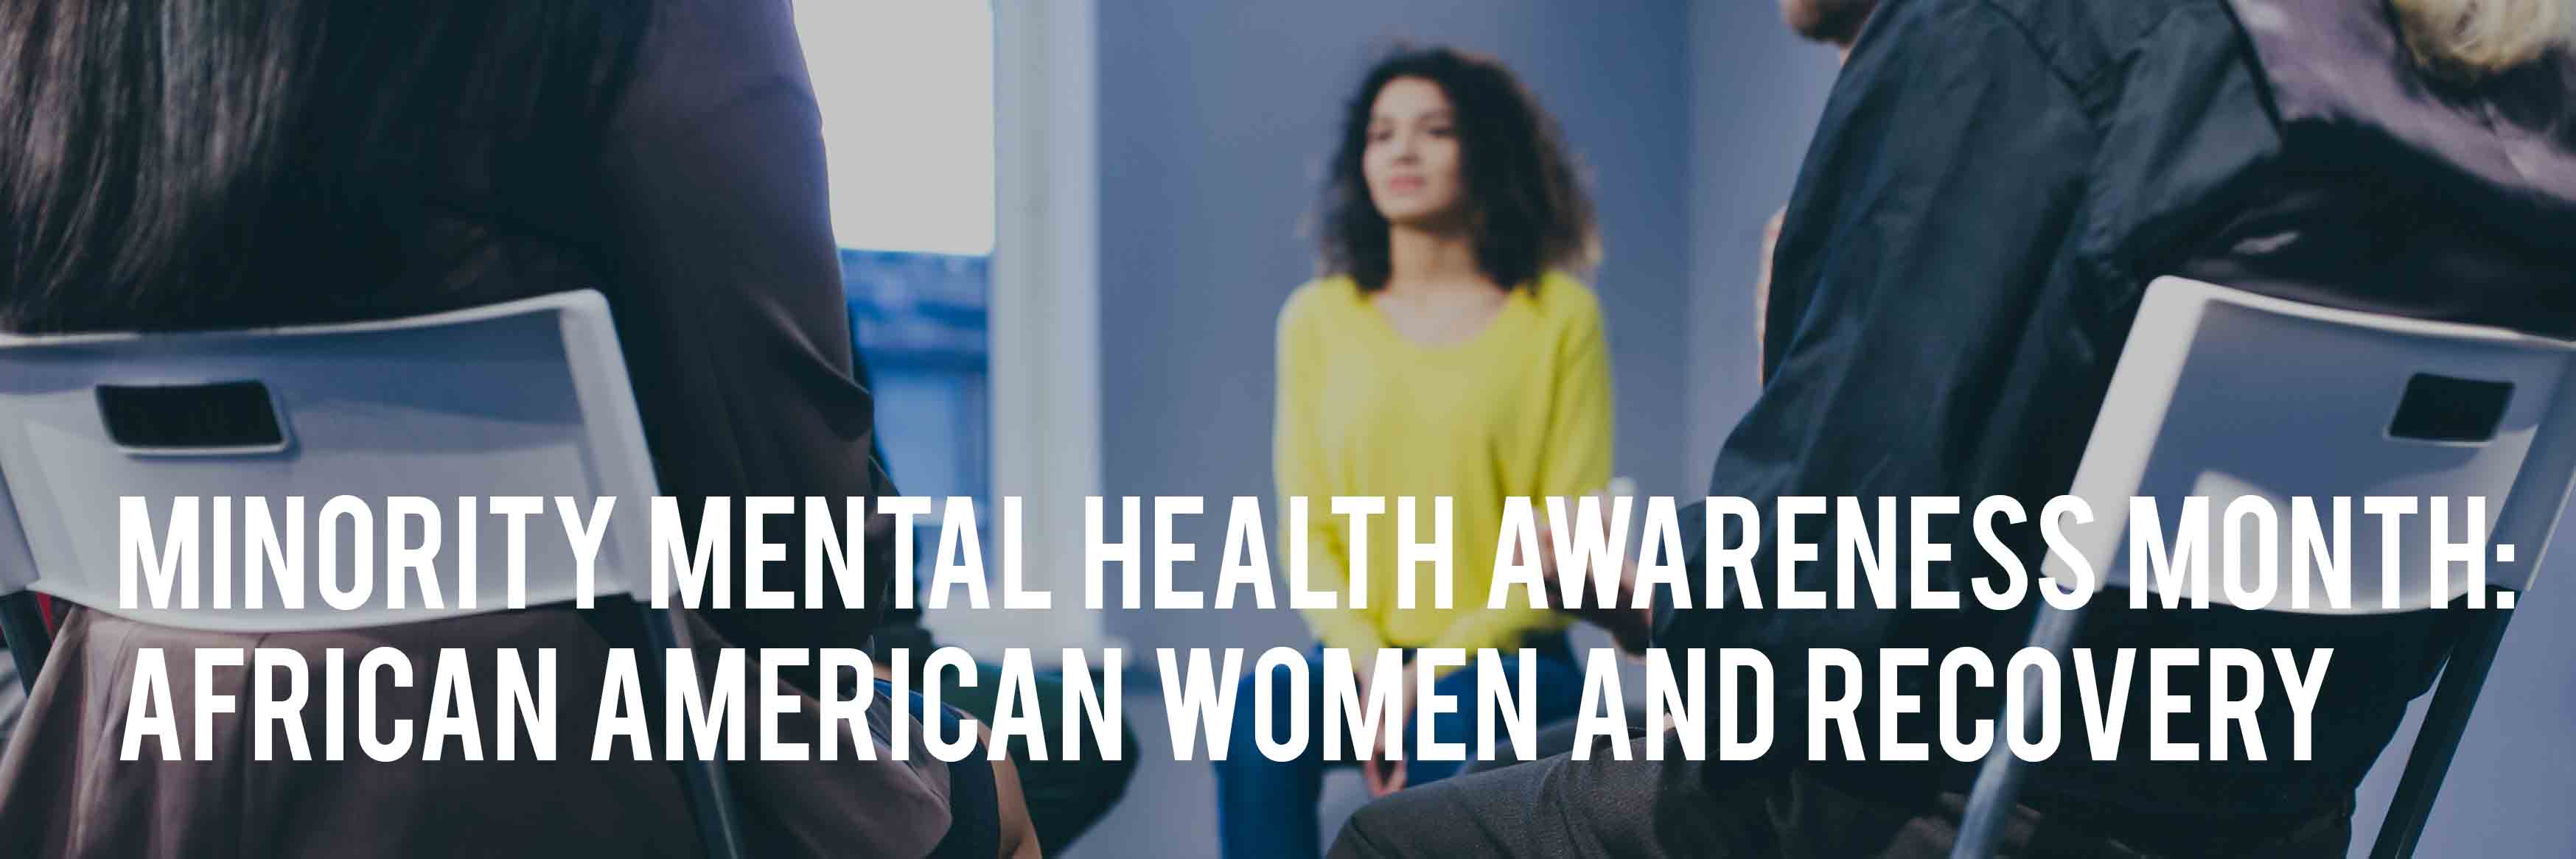 african american women in recovery during minority mental health awareness month